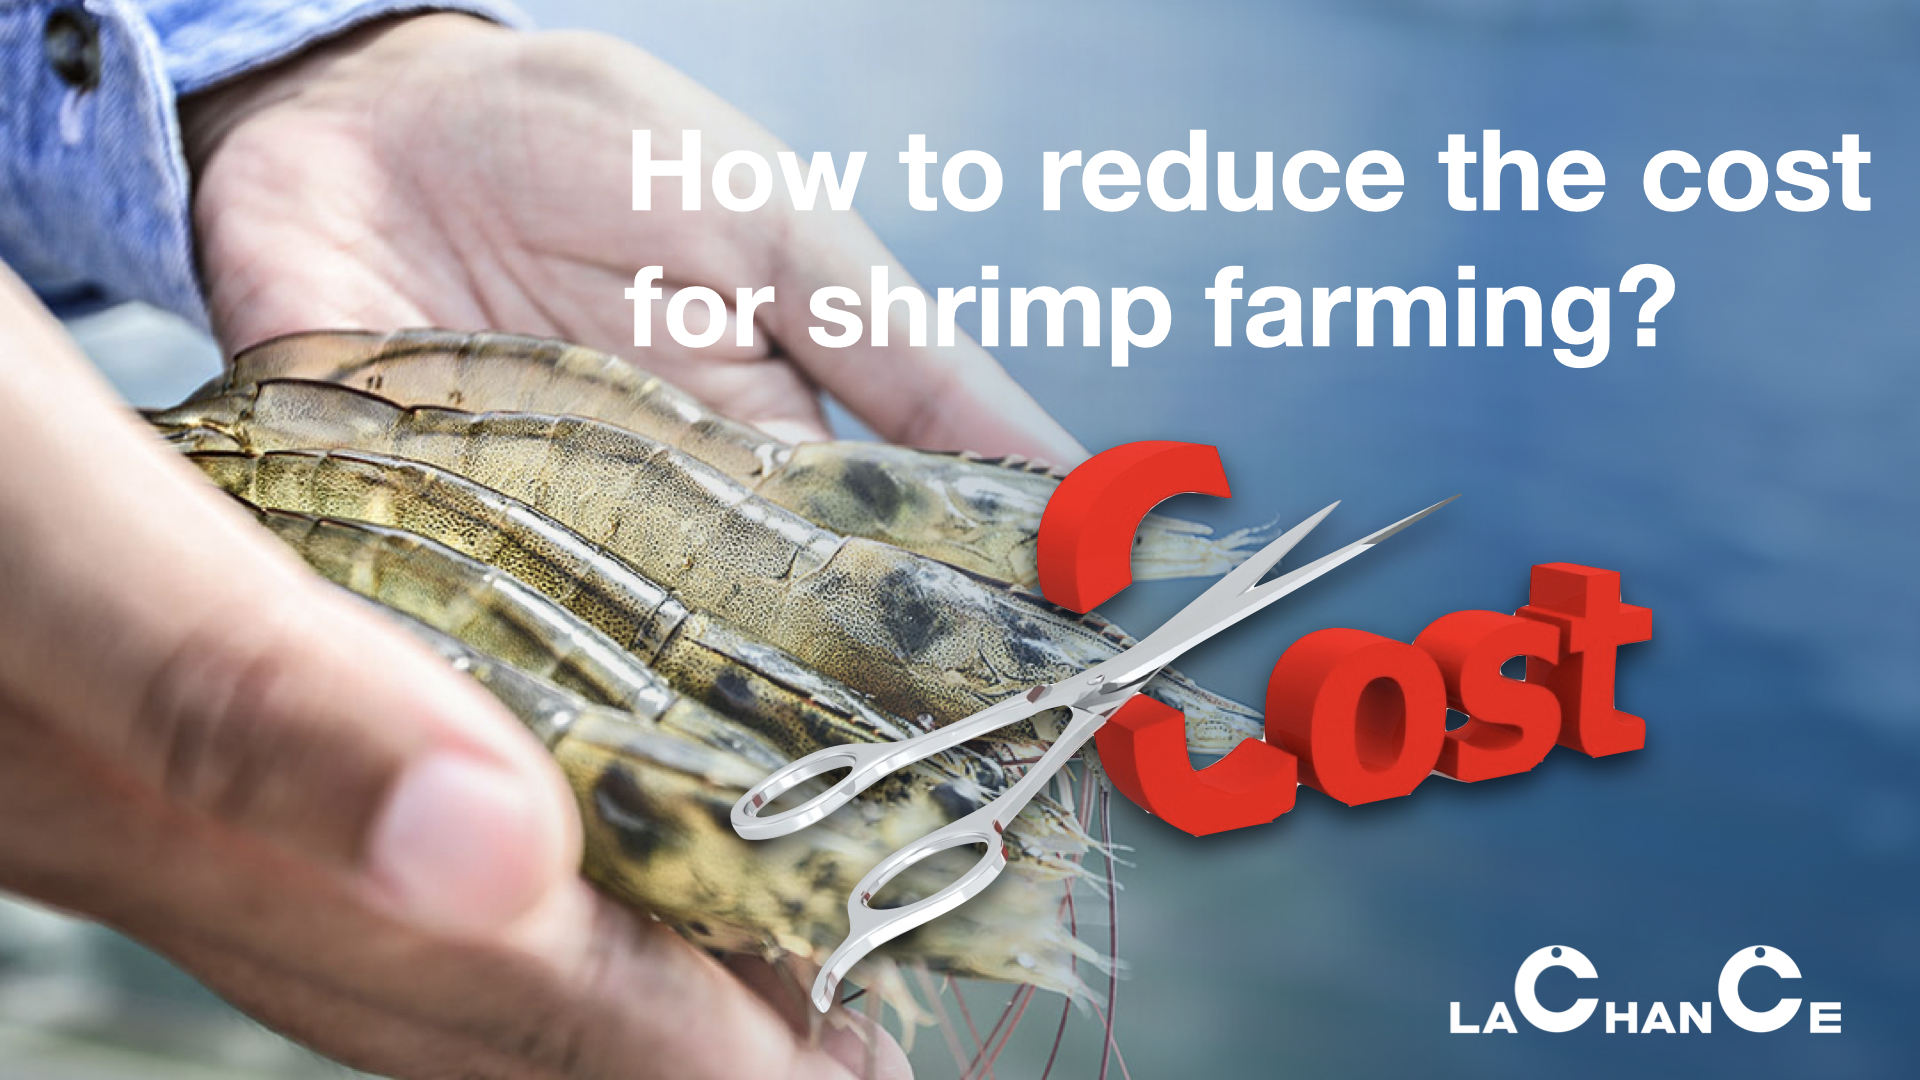 How to reduce the cost for shrimp farming?